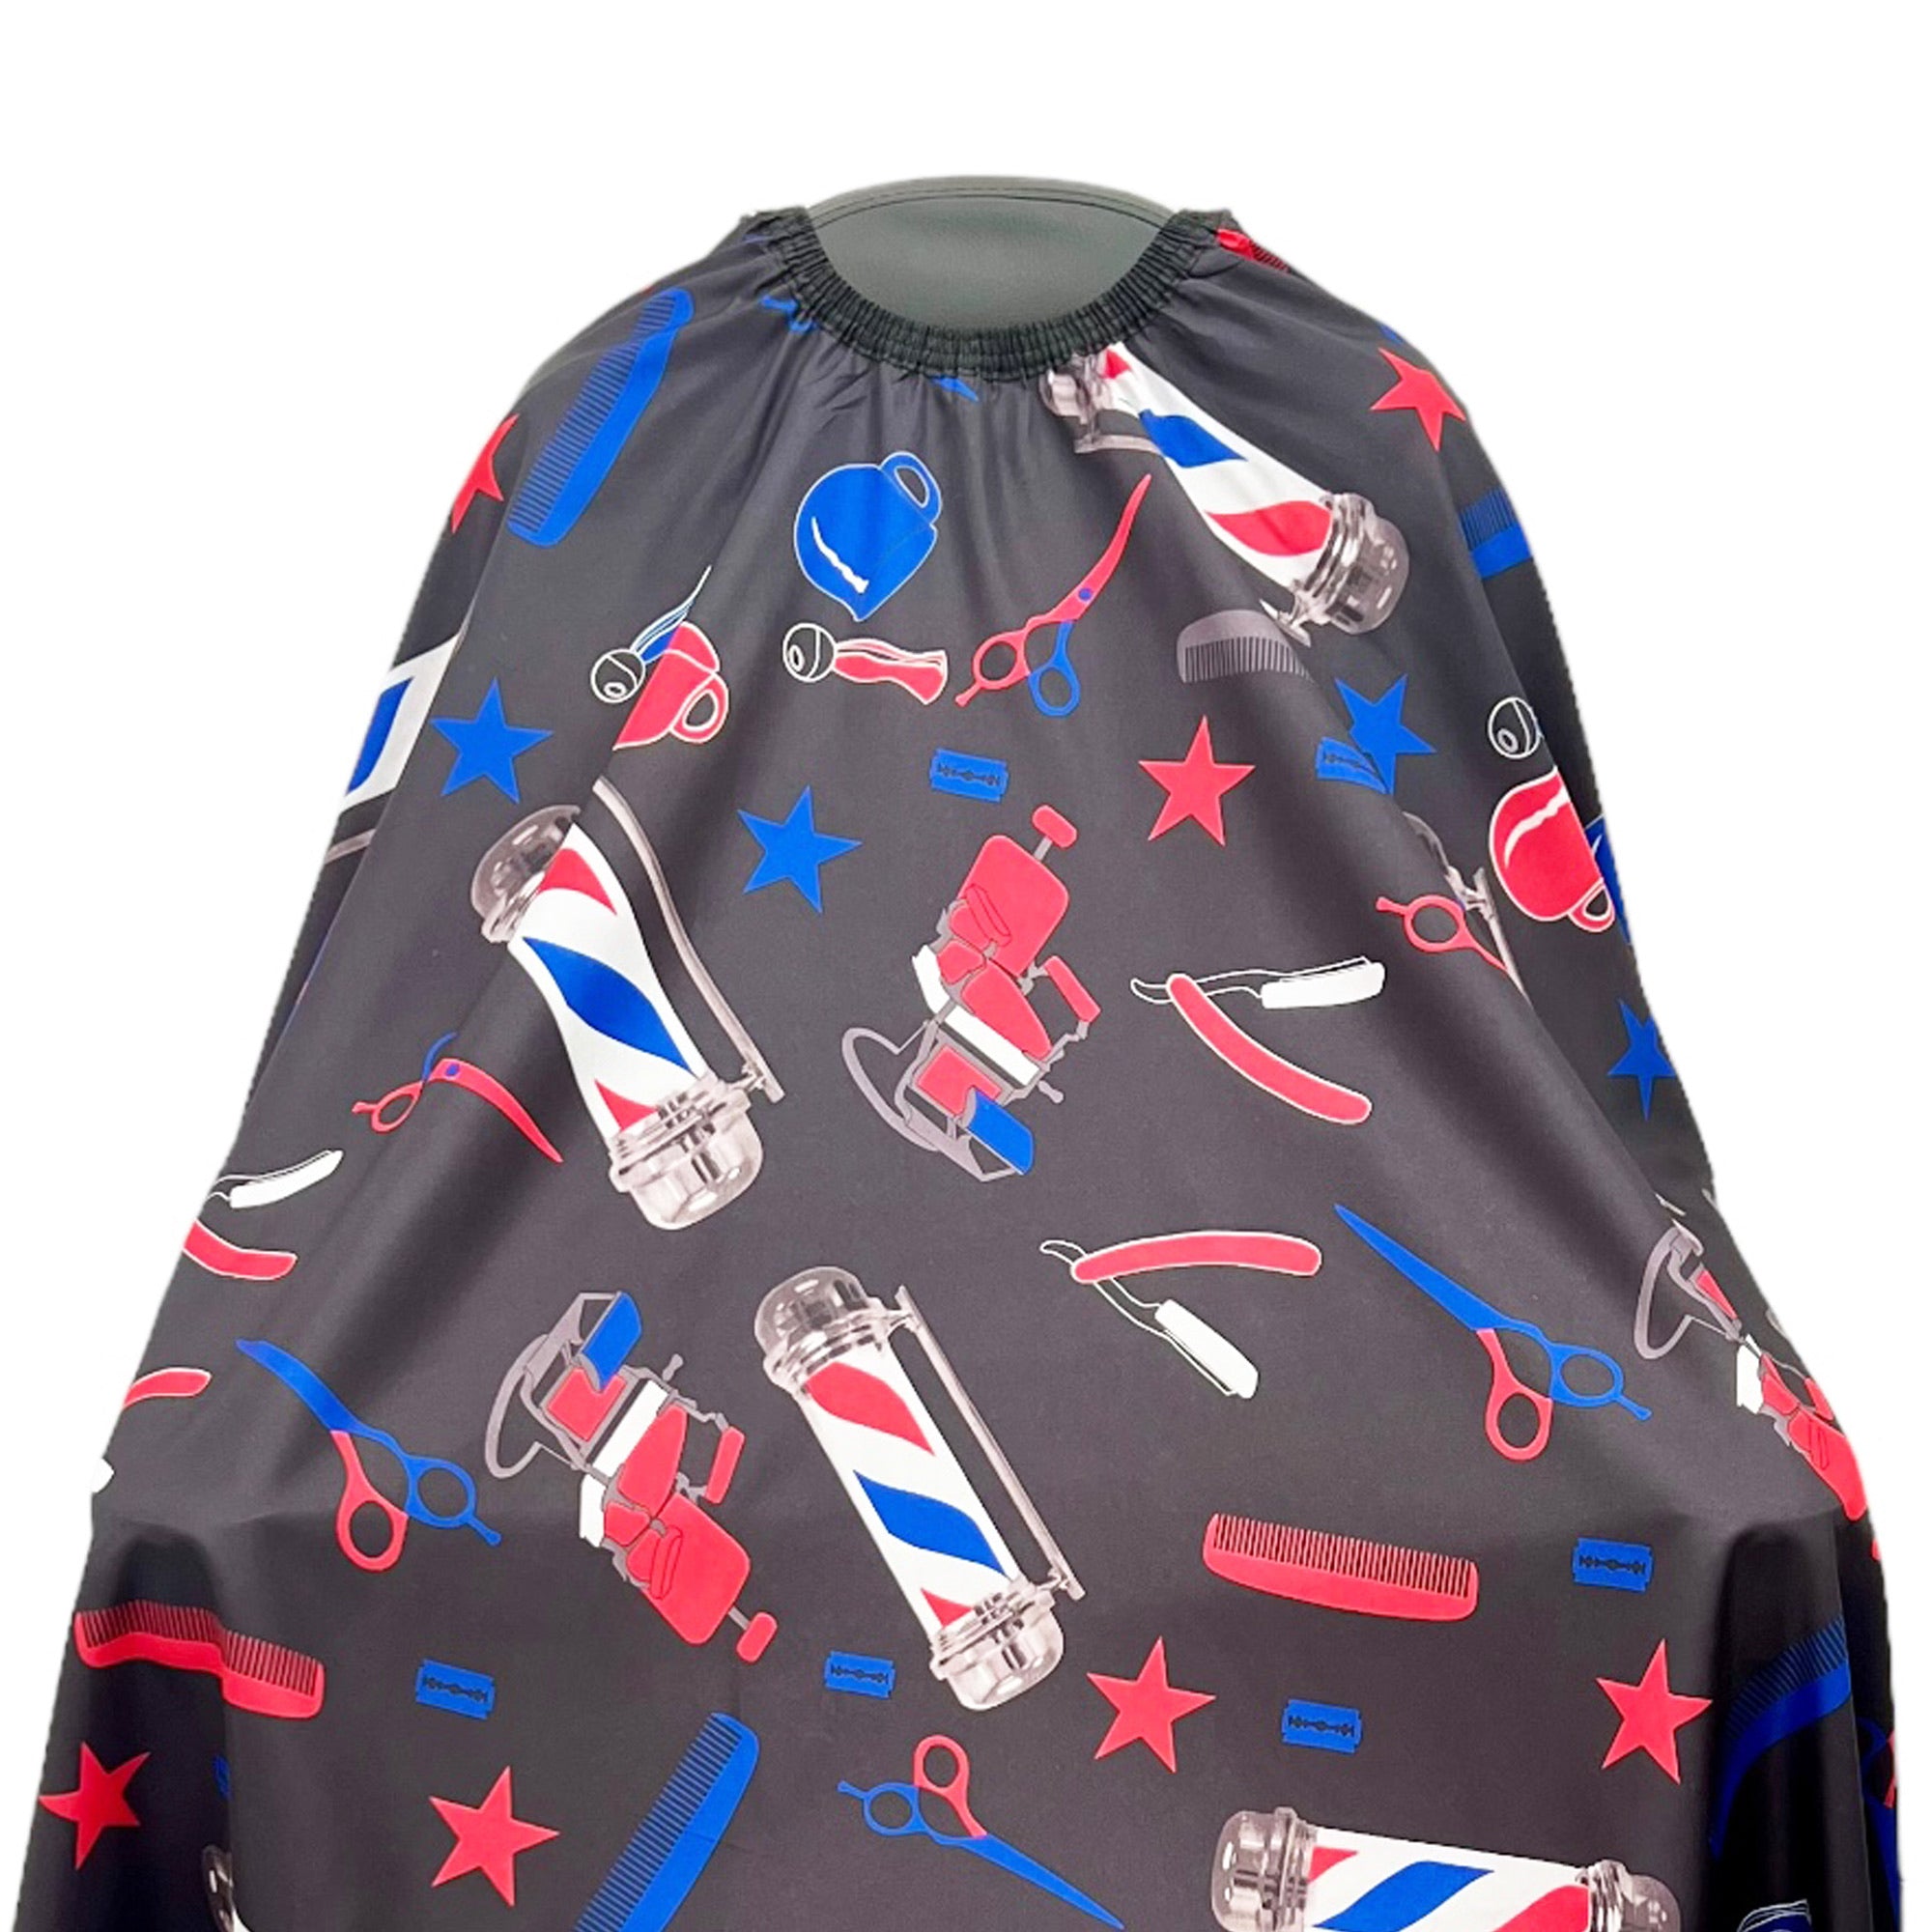 Gabri - Barber Hairdressing Hair Cutting Capes & Gowns Tools Pattern (Black Red & Blue)